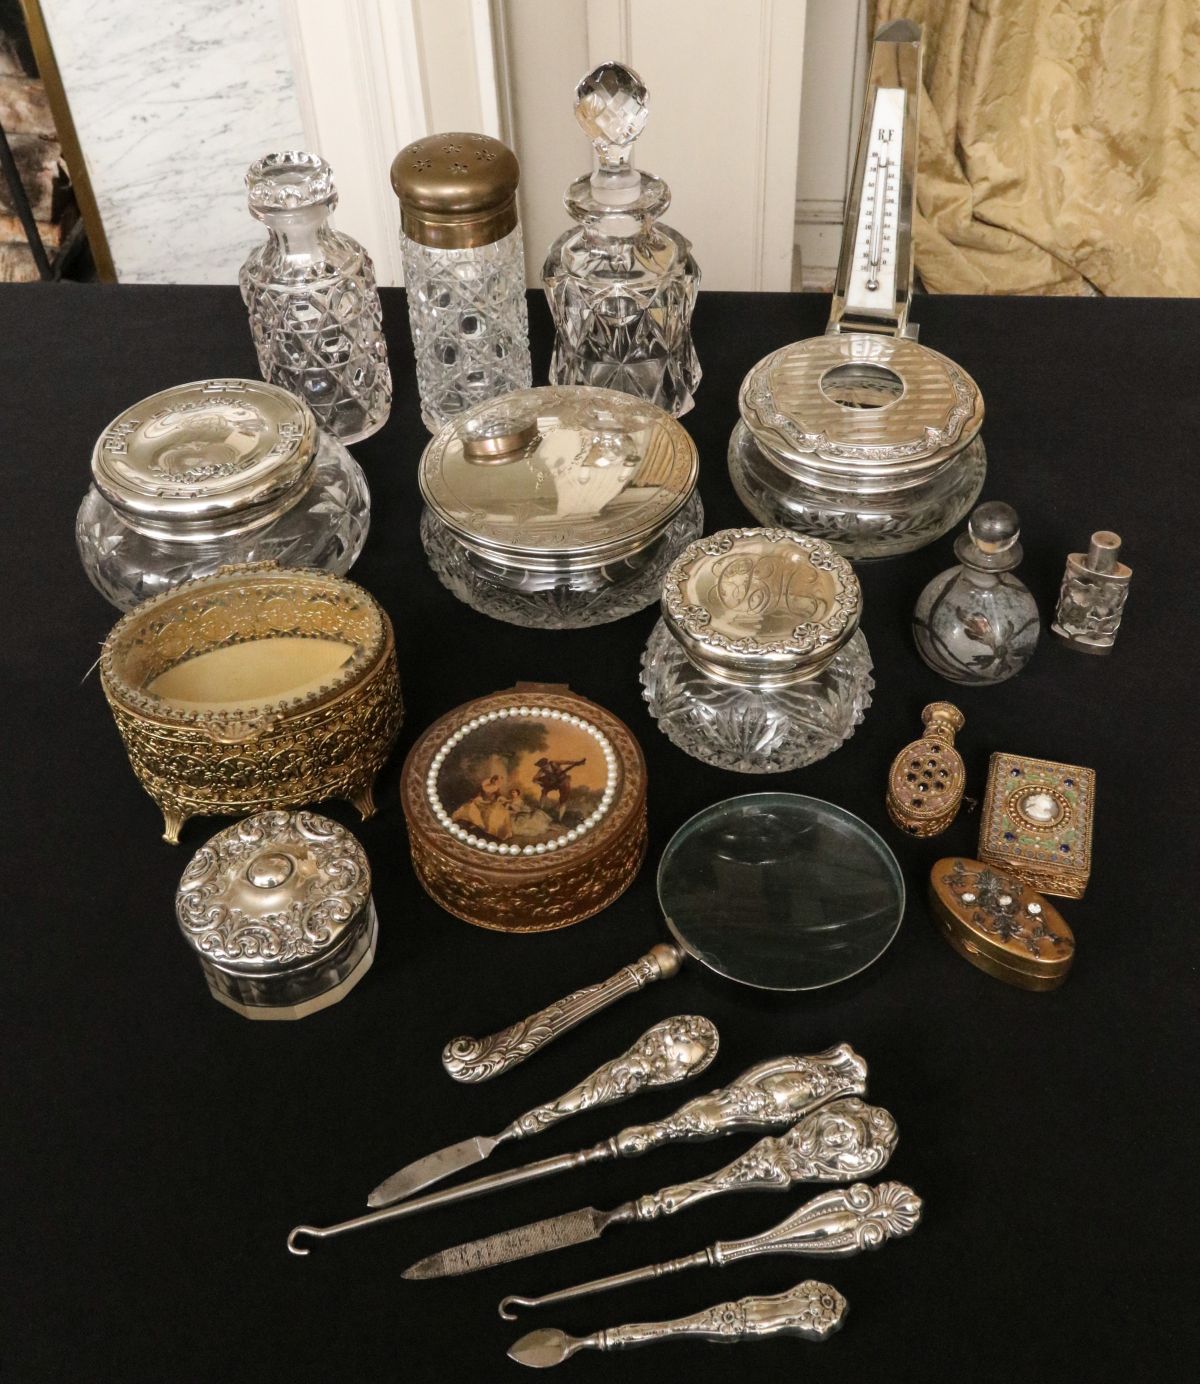 EDWARDIAN CUT GLASS DRESSER ITEMS WITH STERLING